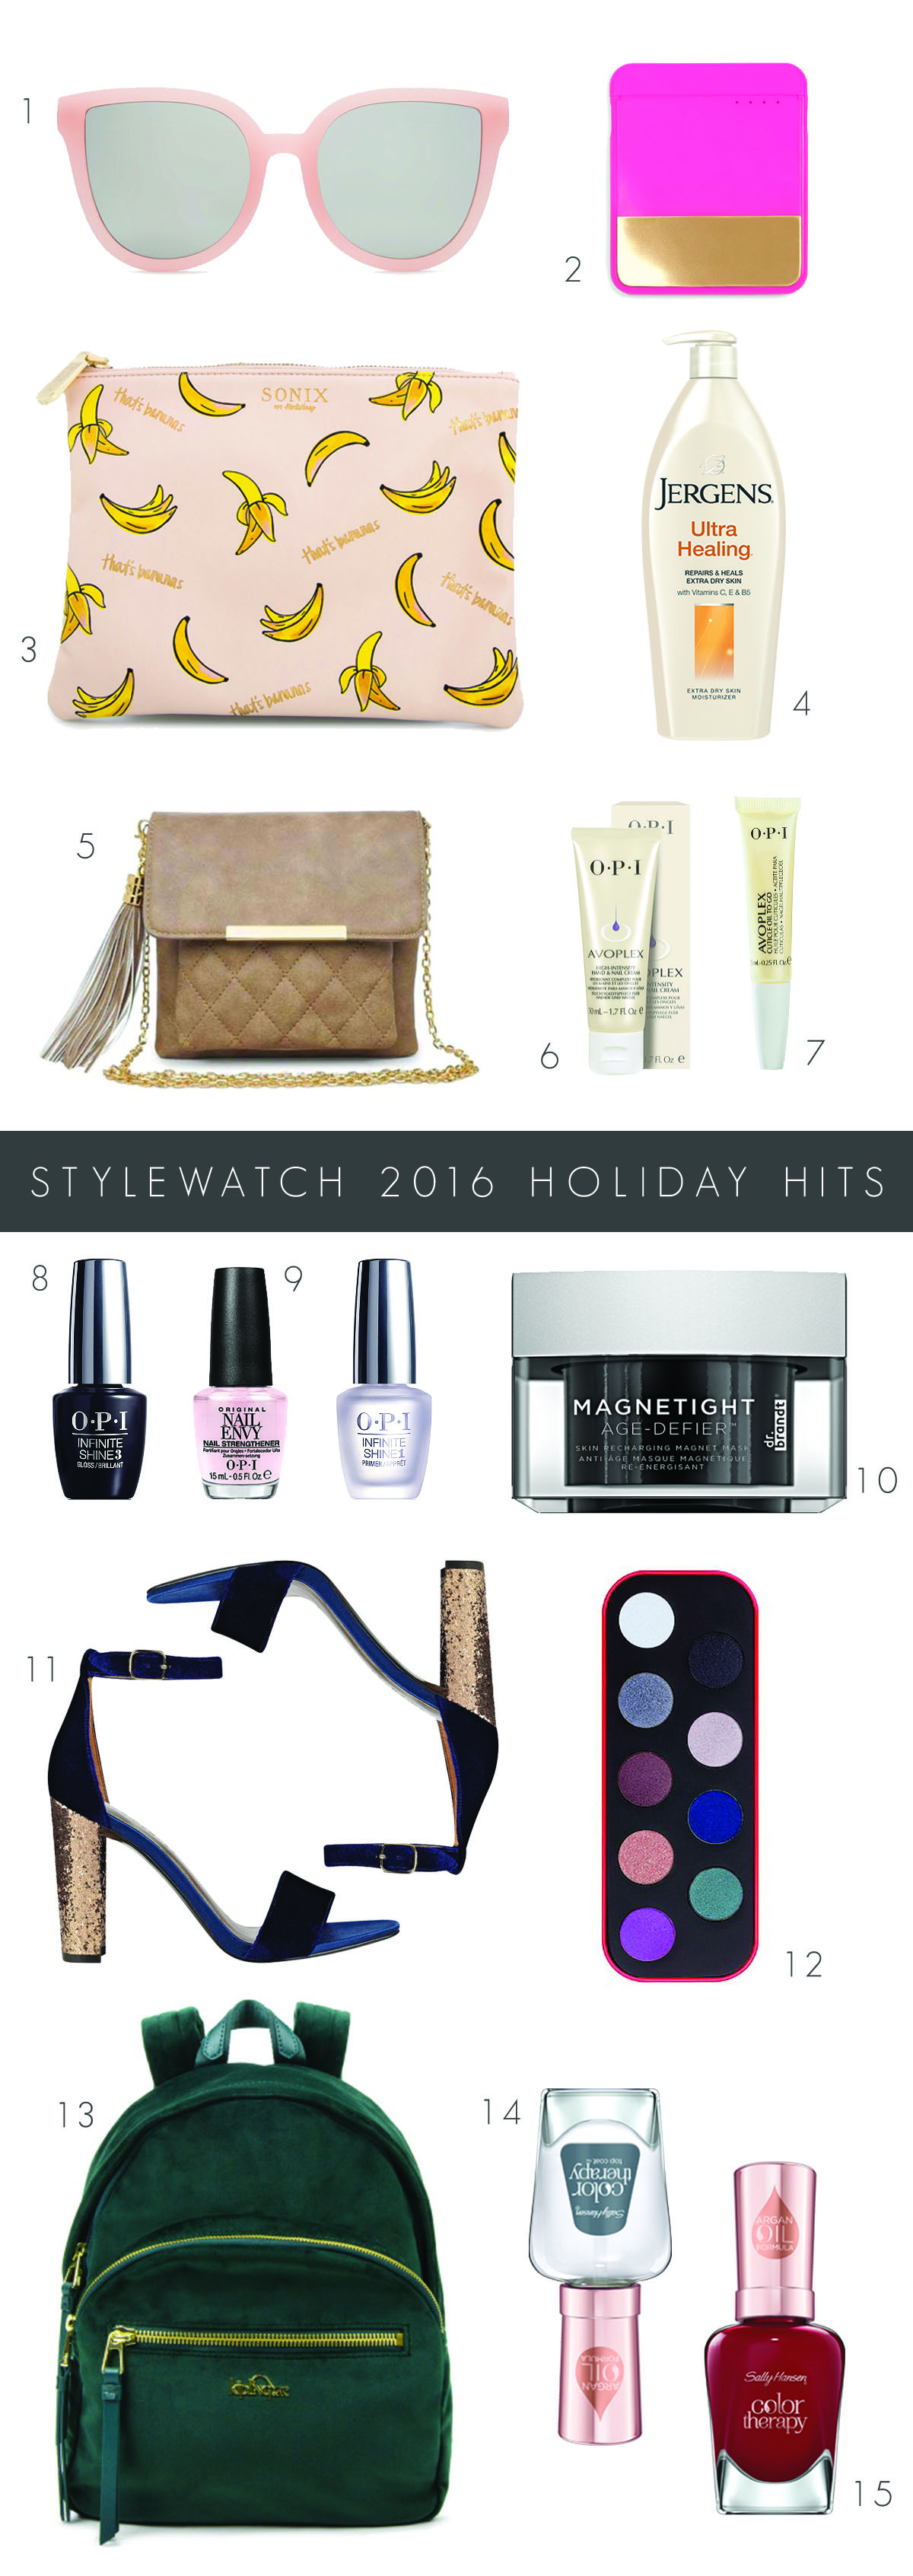 Stylewatch Holiday Hits